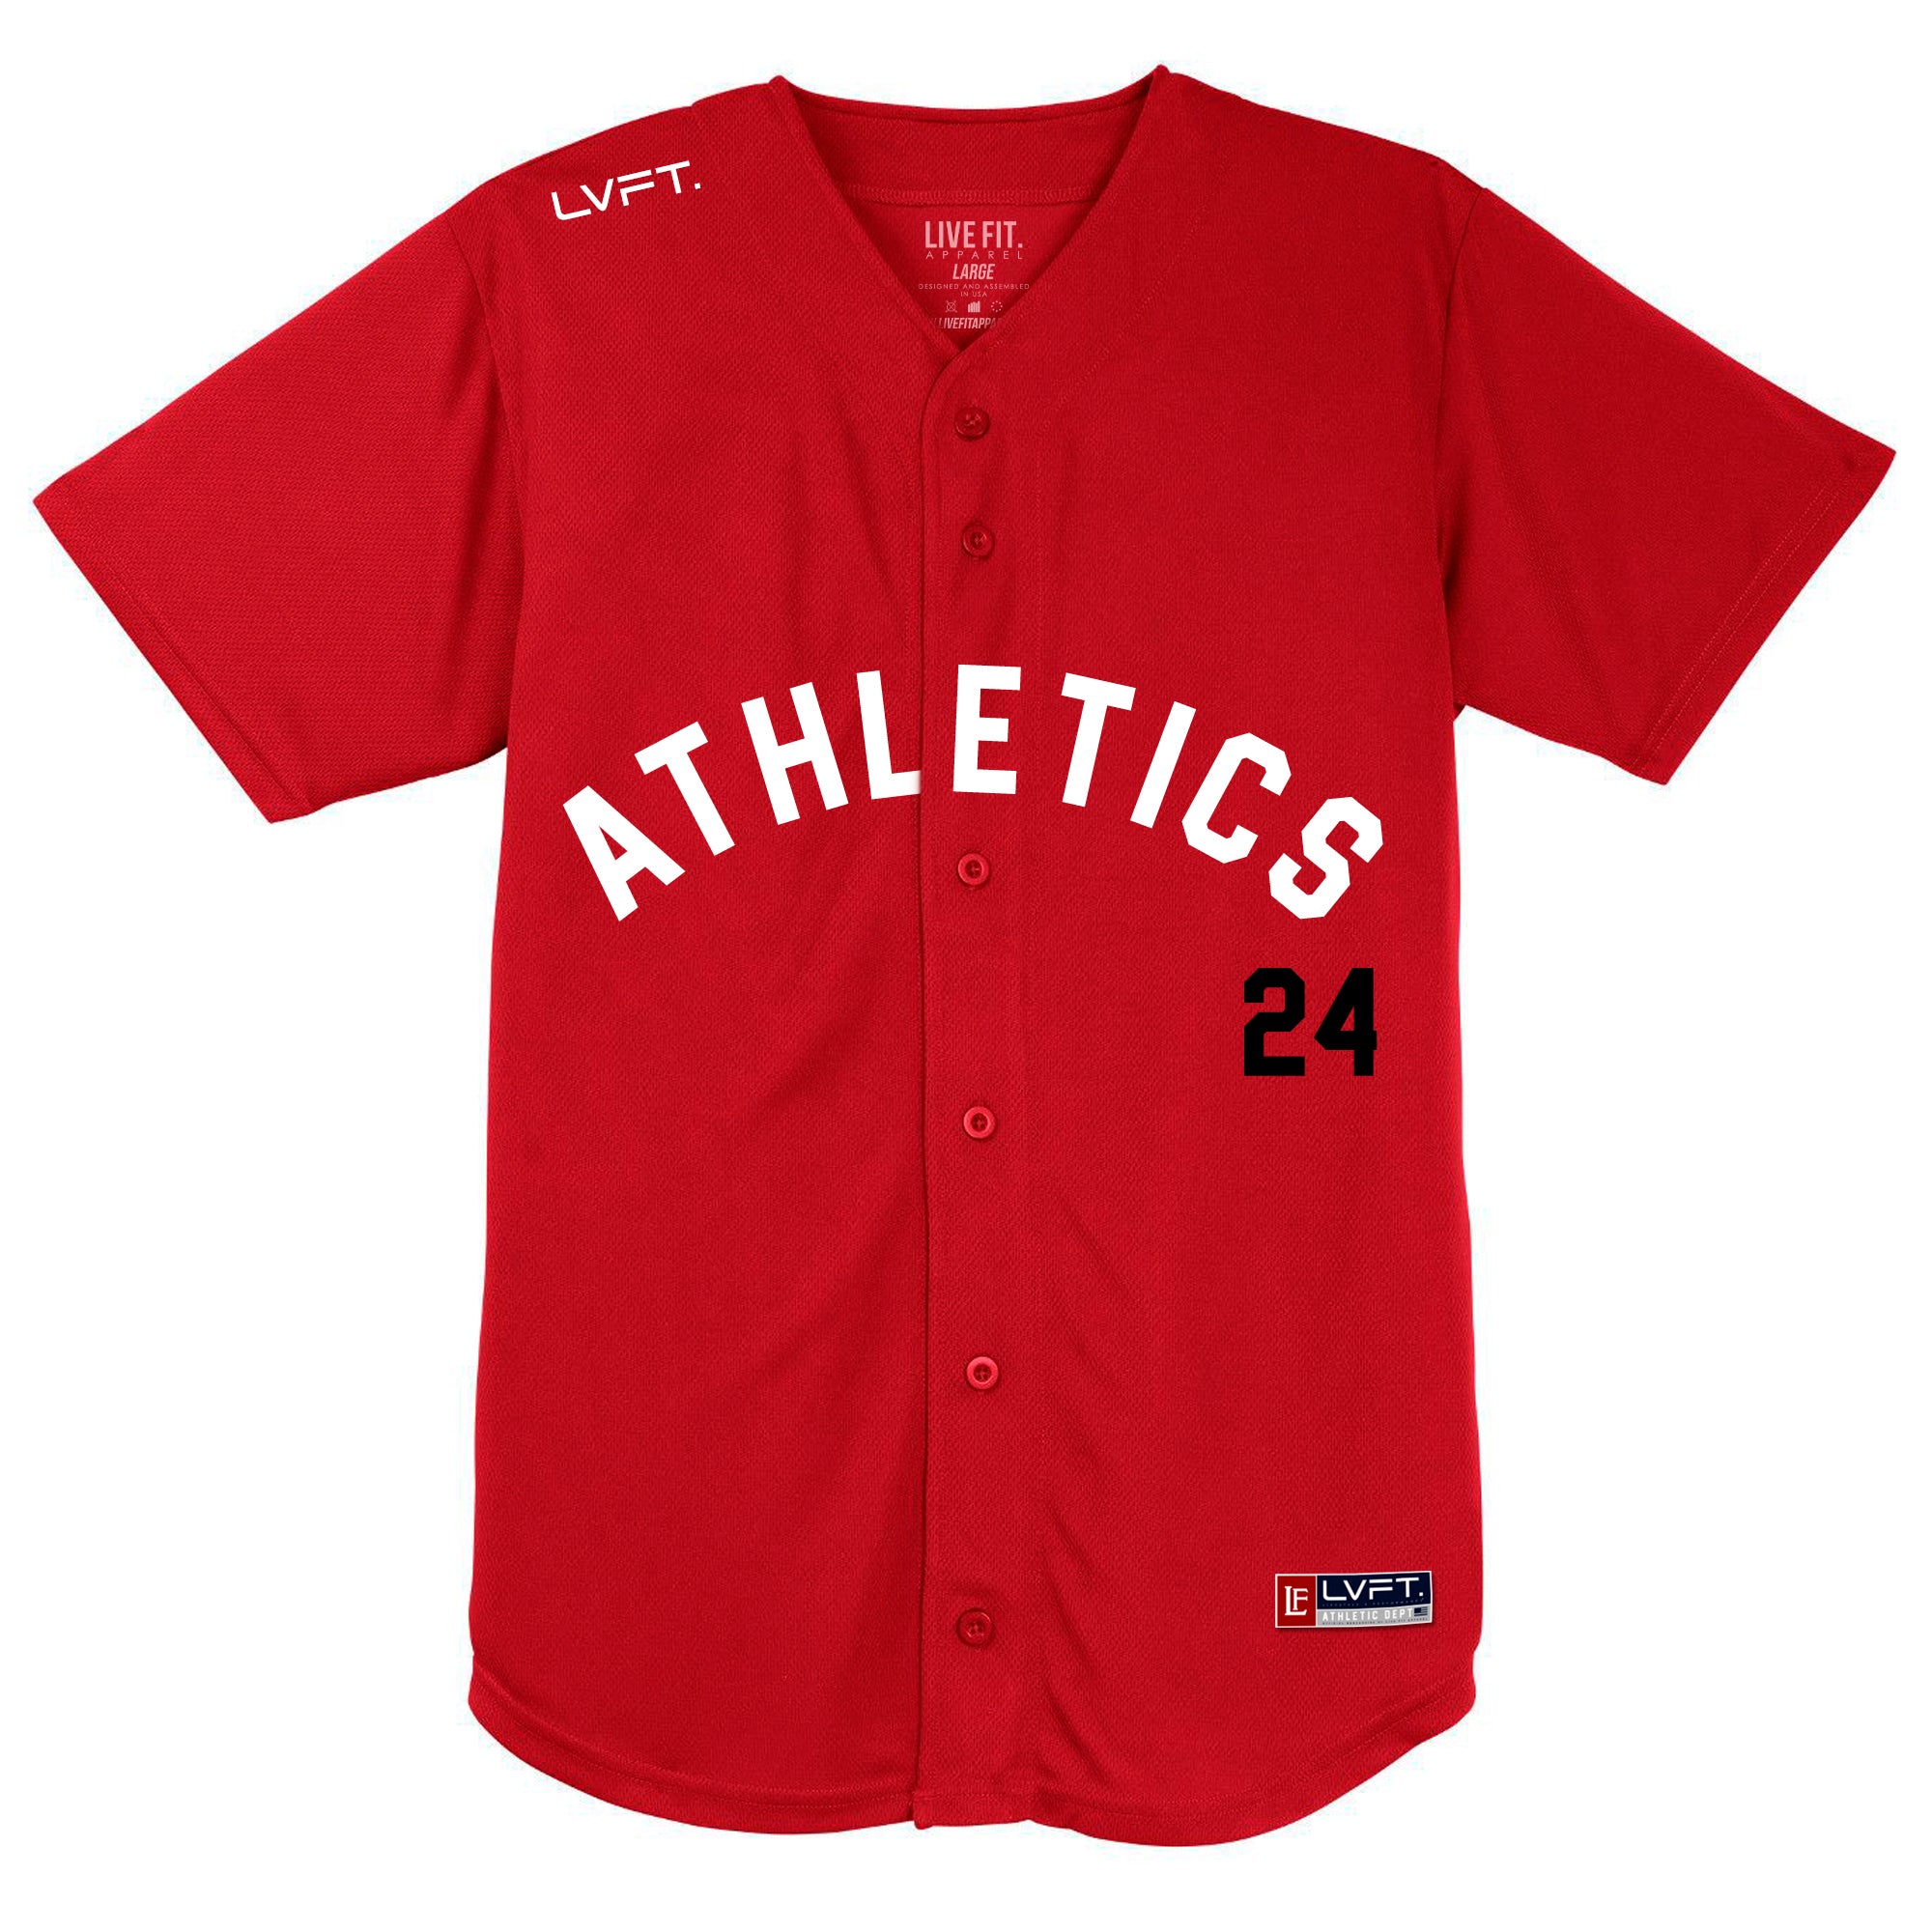 gray and red baseball jersey